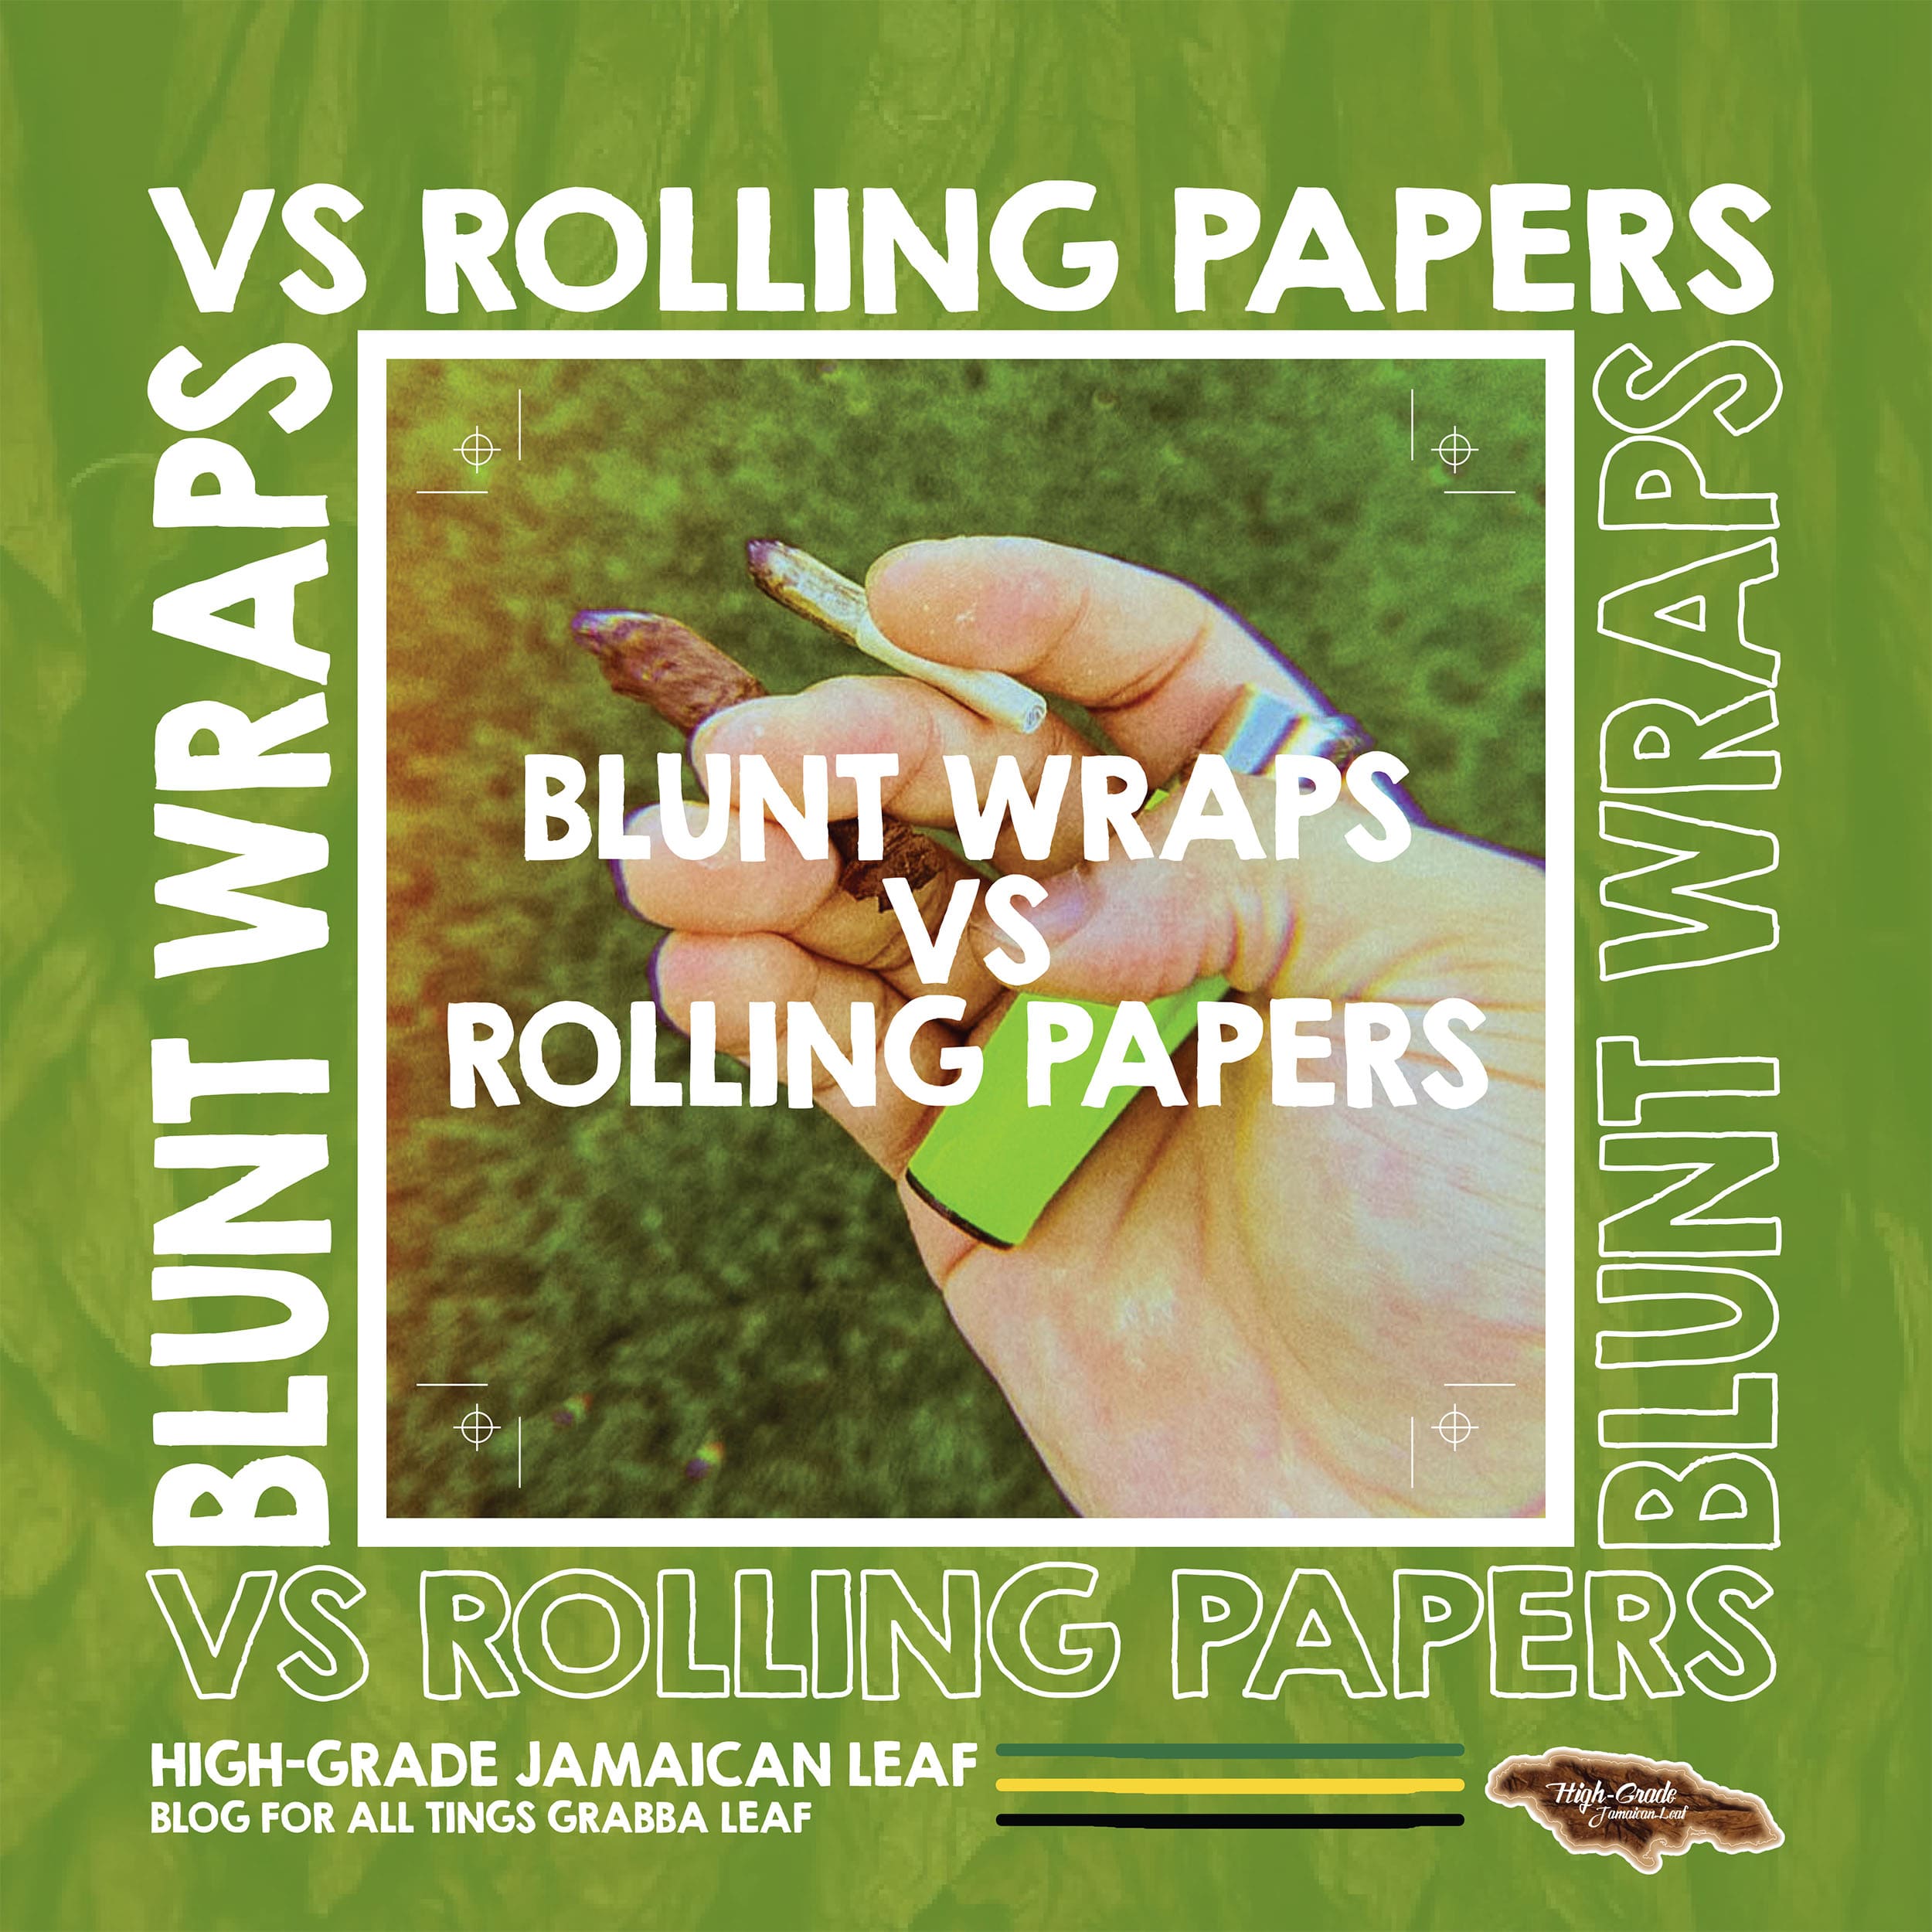 Blunt Wraps vs Rolling Papers